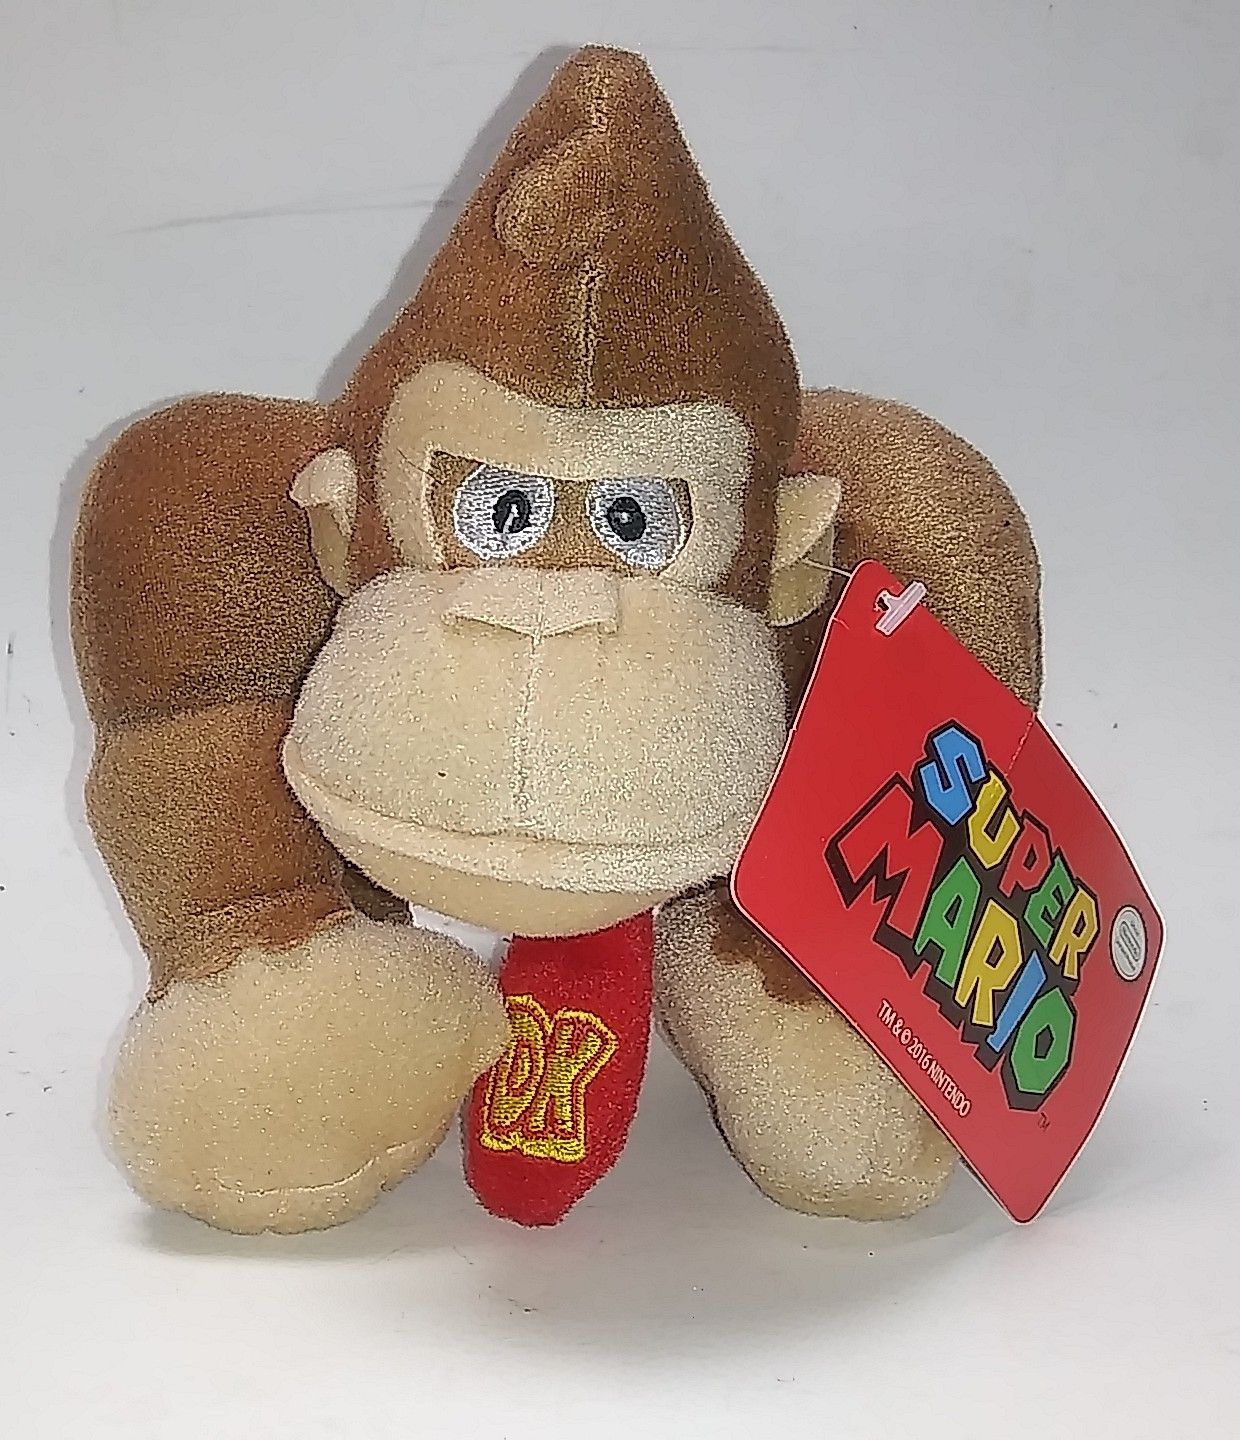 Nintendo Super Mario Brothers DONKEY KONG 5" Plush STUFFED ANIMAL Toy Pre-owned. Pre-owned